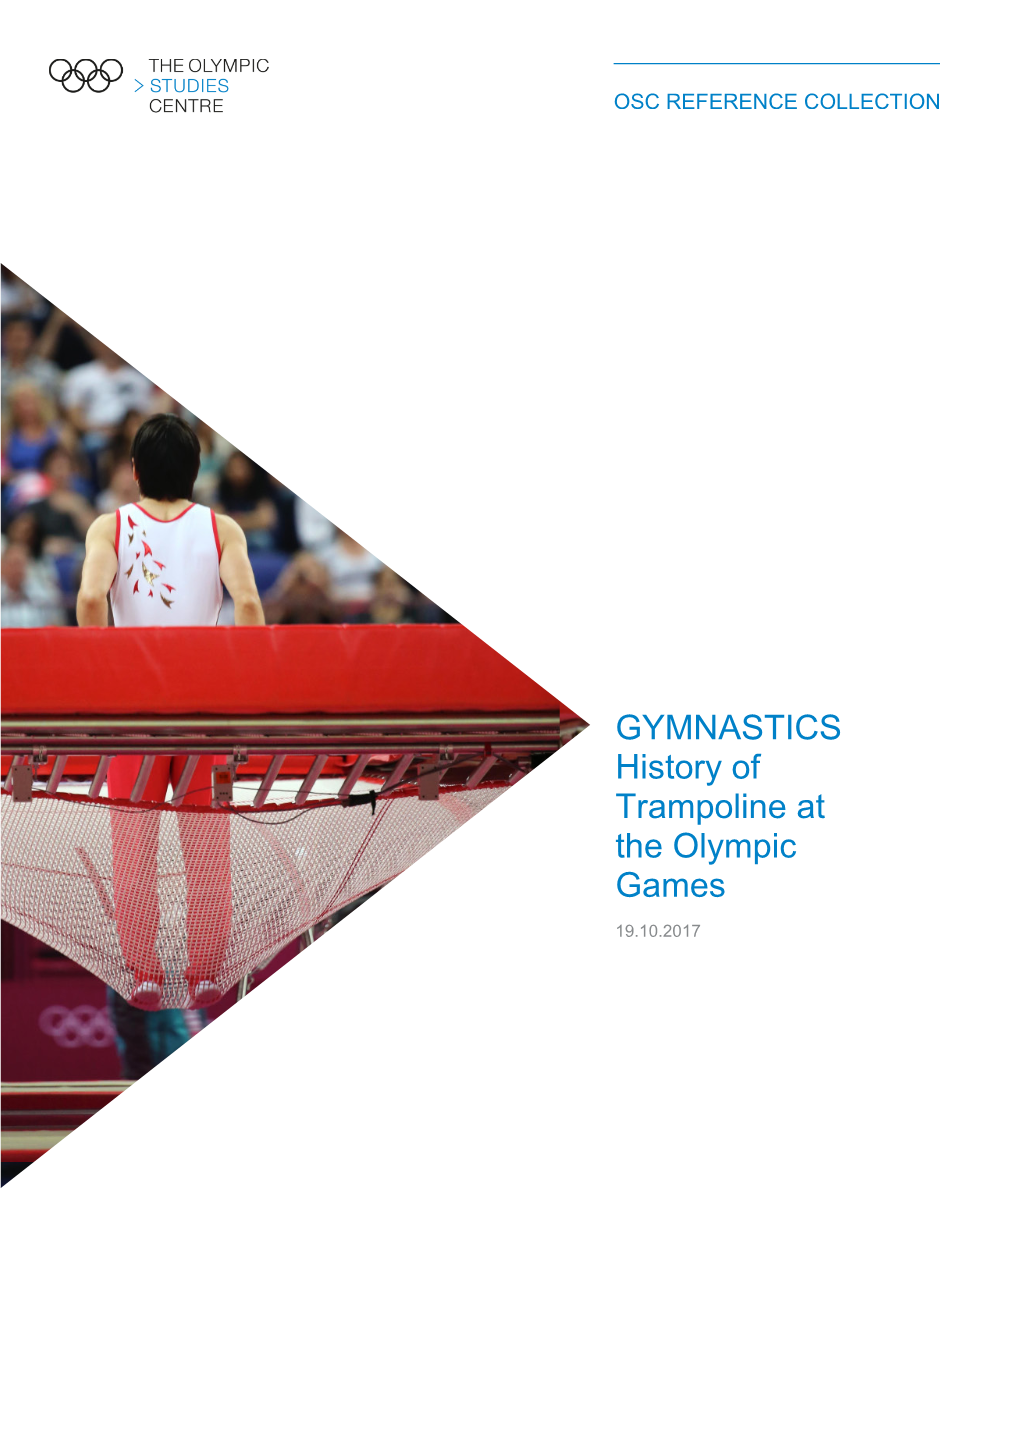 GYMNASTICS: History of Trampoline at the Olympic Games